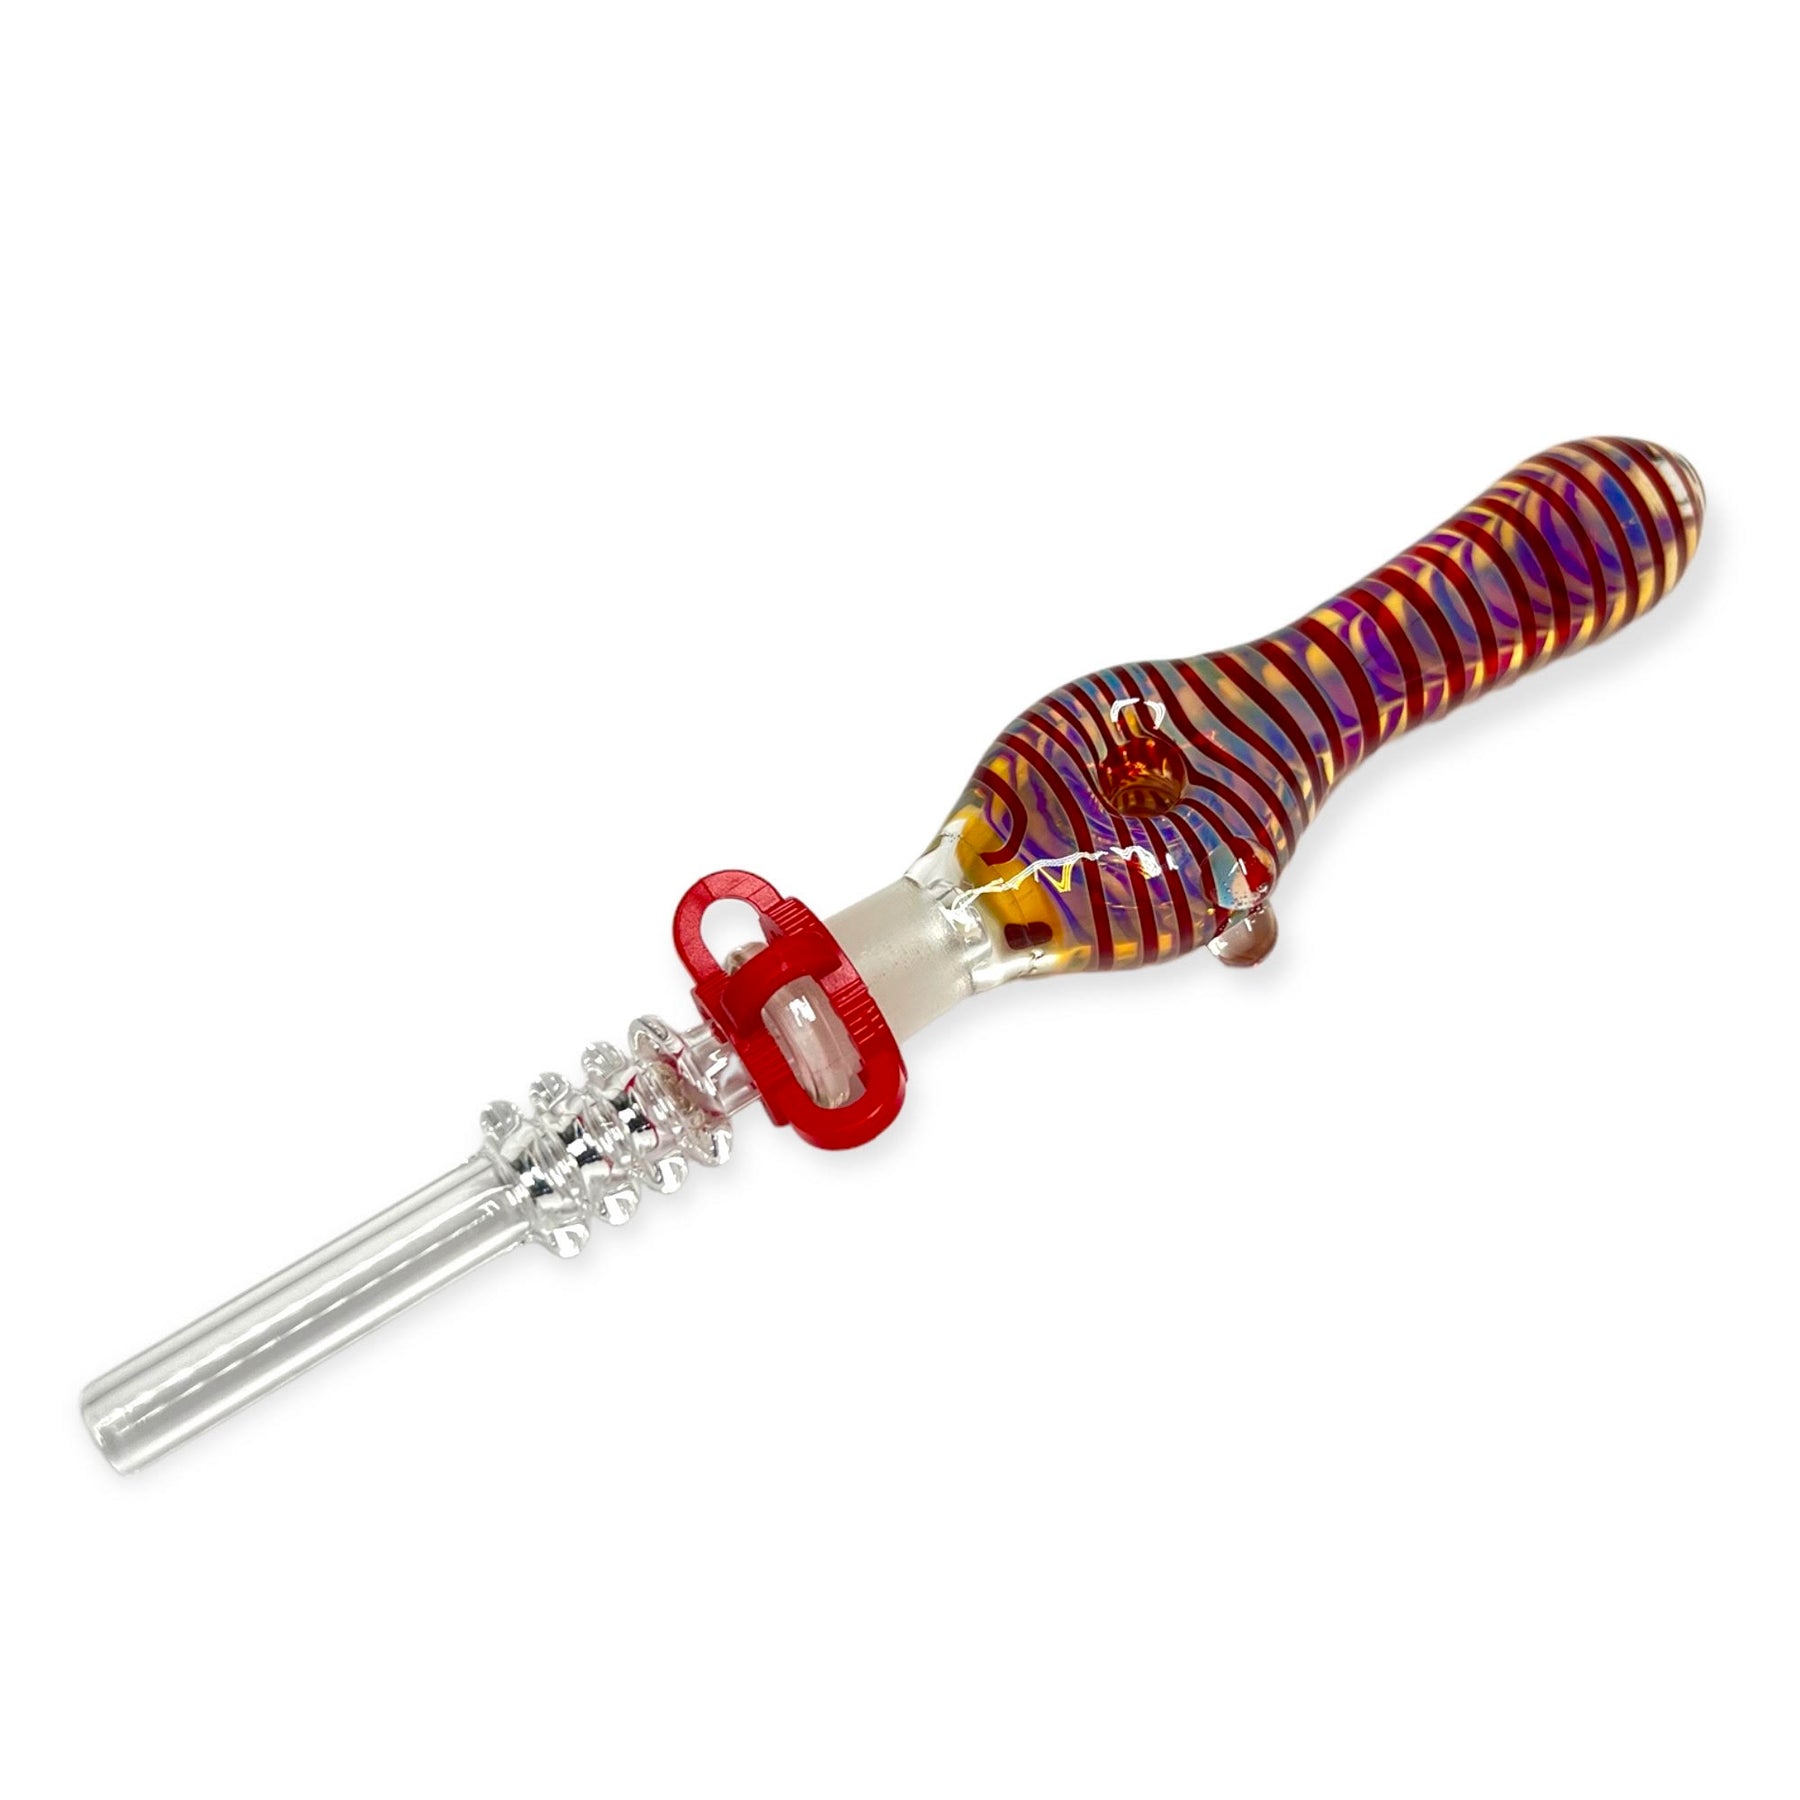 Quartz Tip Nectar Collector with Donut Hole Red